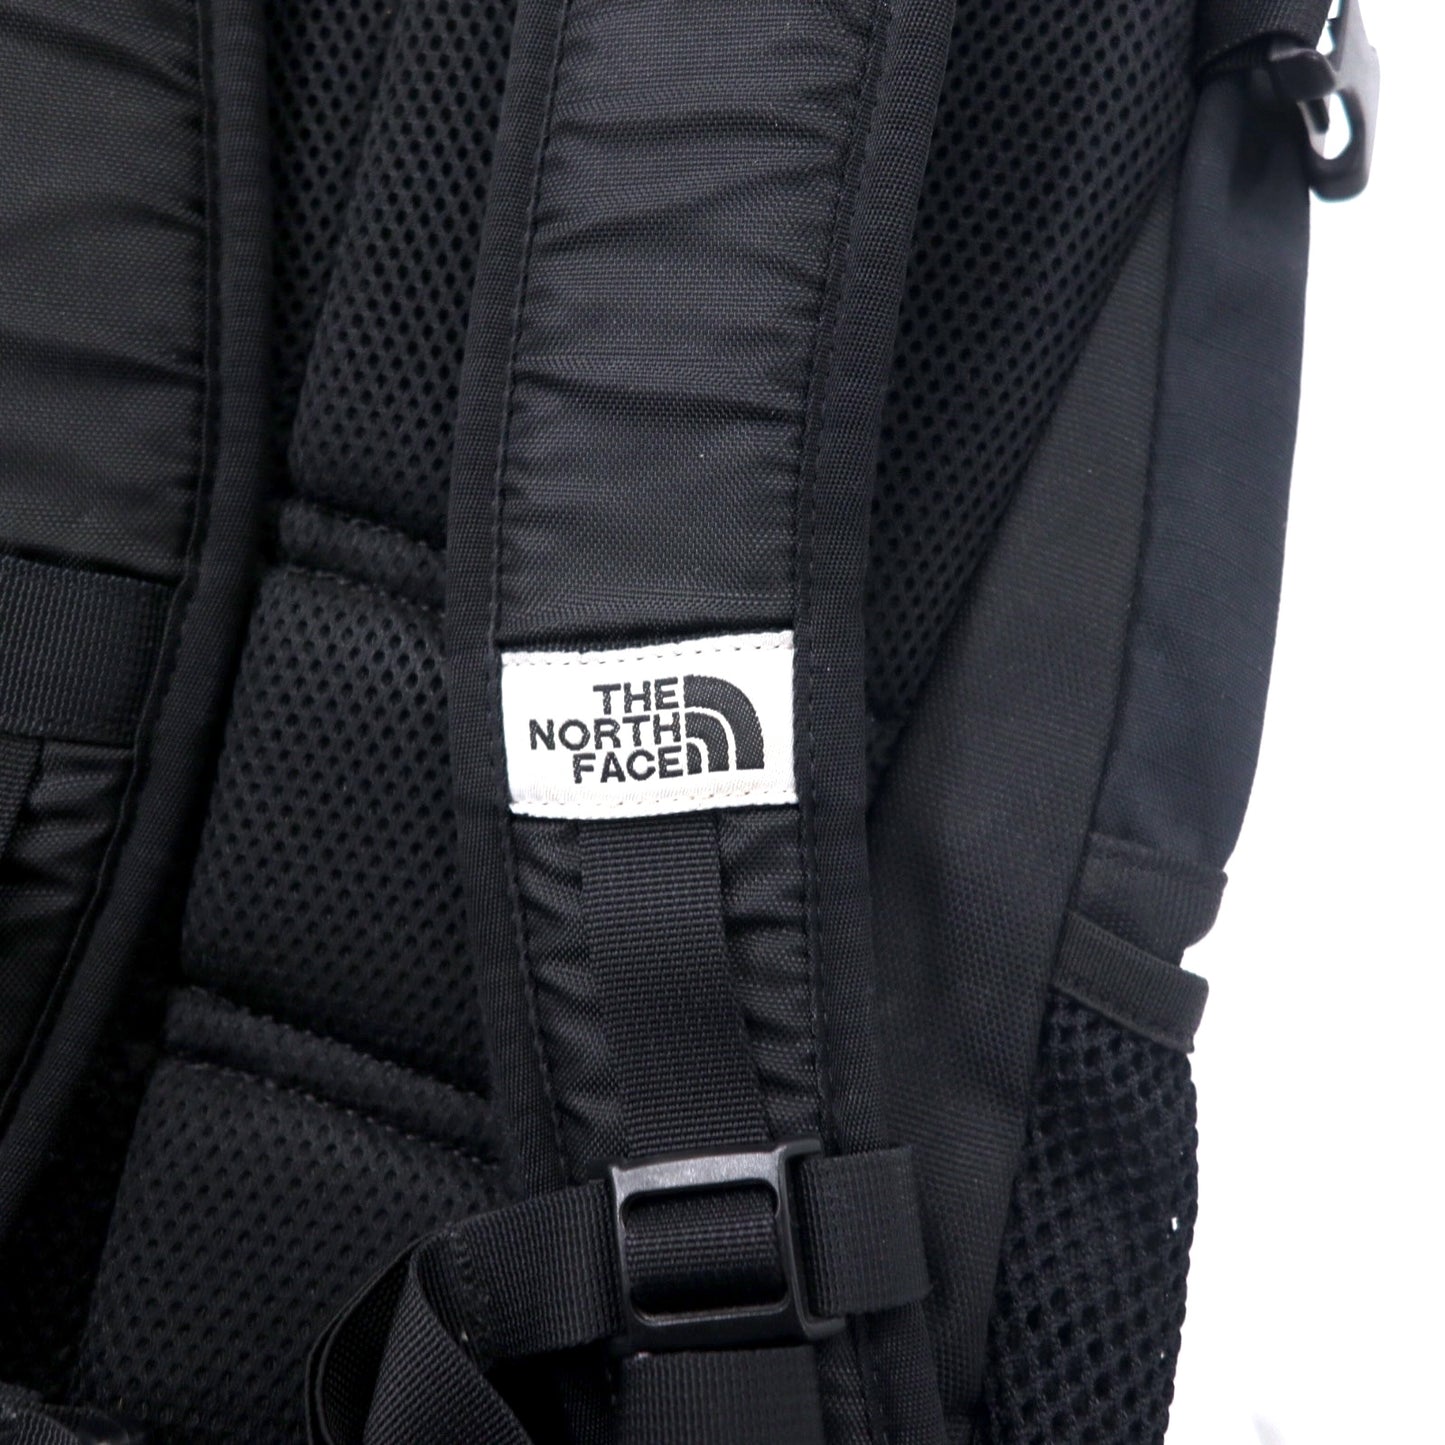 THE NORTH FACE ボーダーライン バックパック リュックサック 30L ブラック ナイロン ロゴ刺繍 BORDER LINE NM07711A